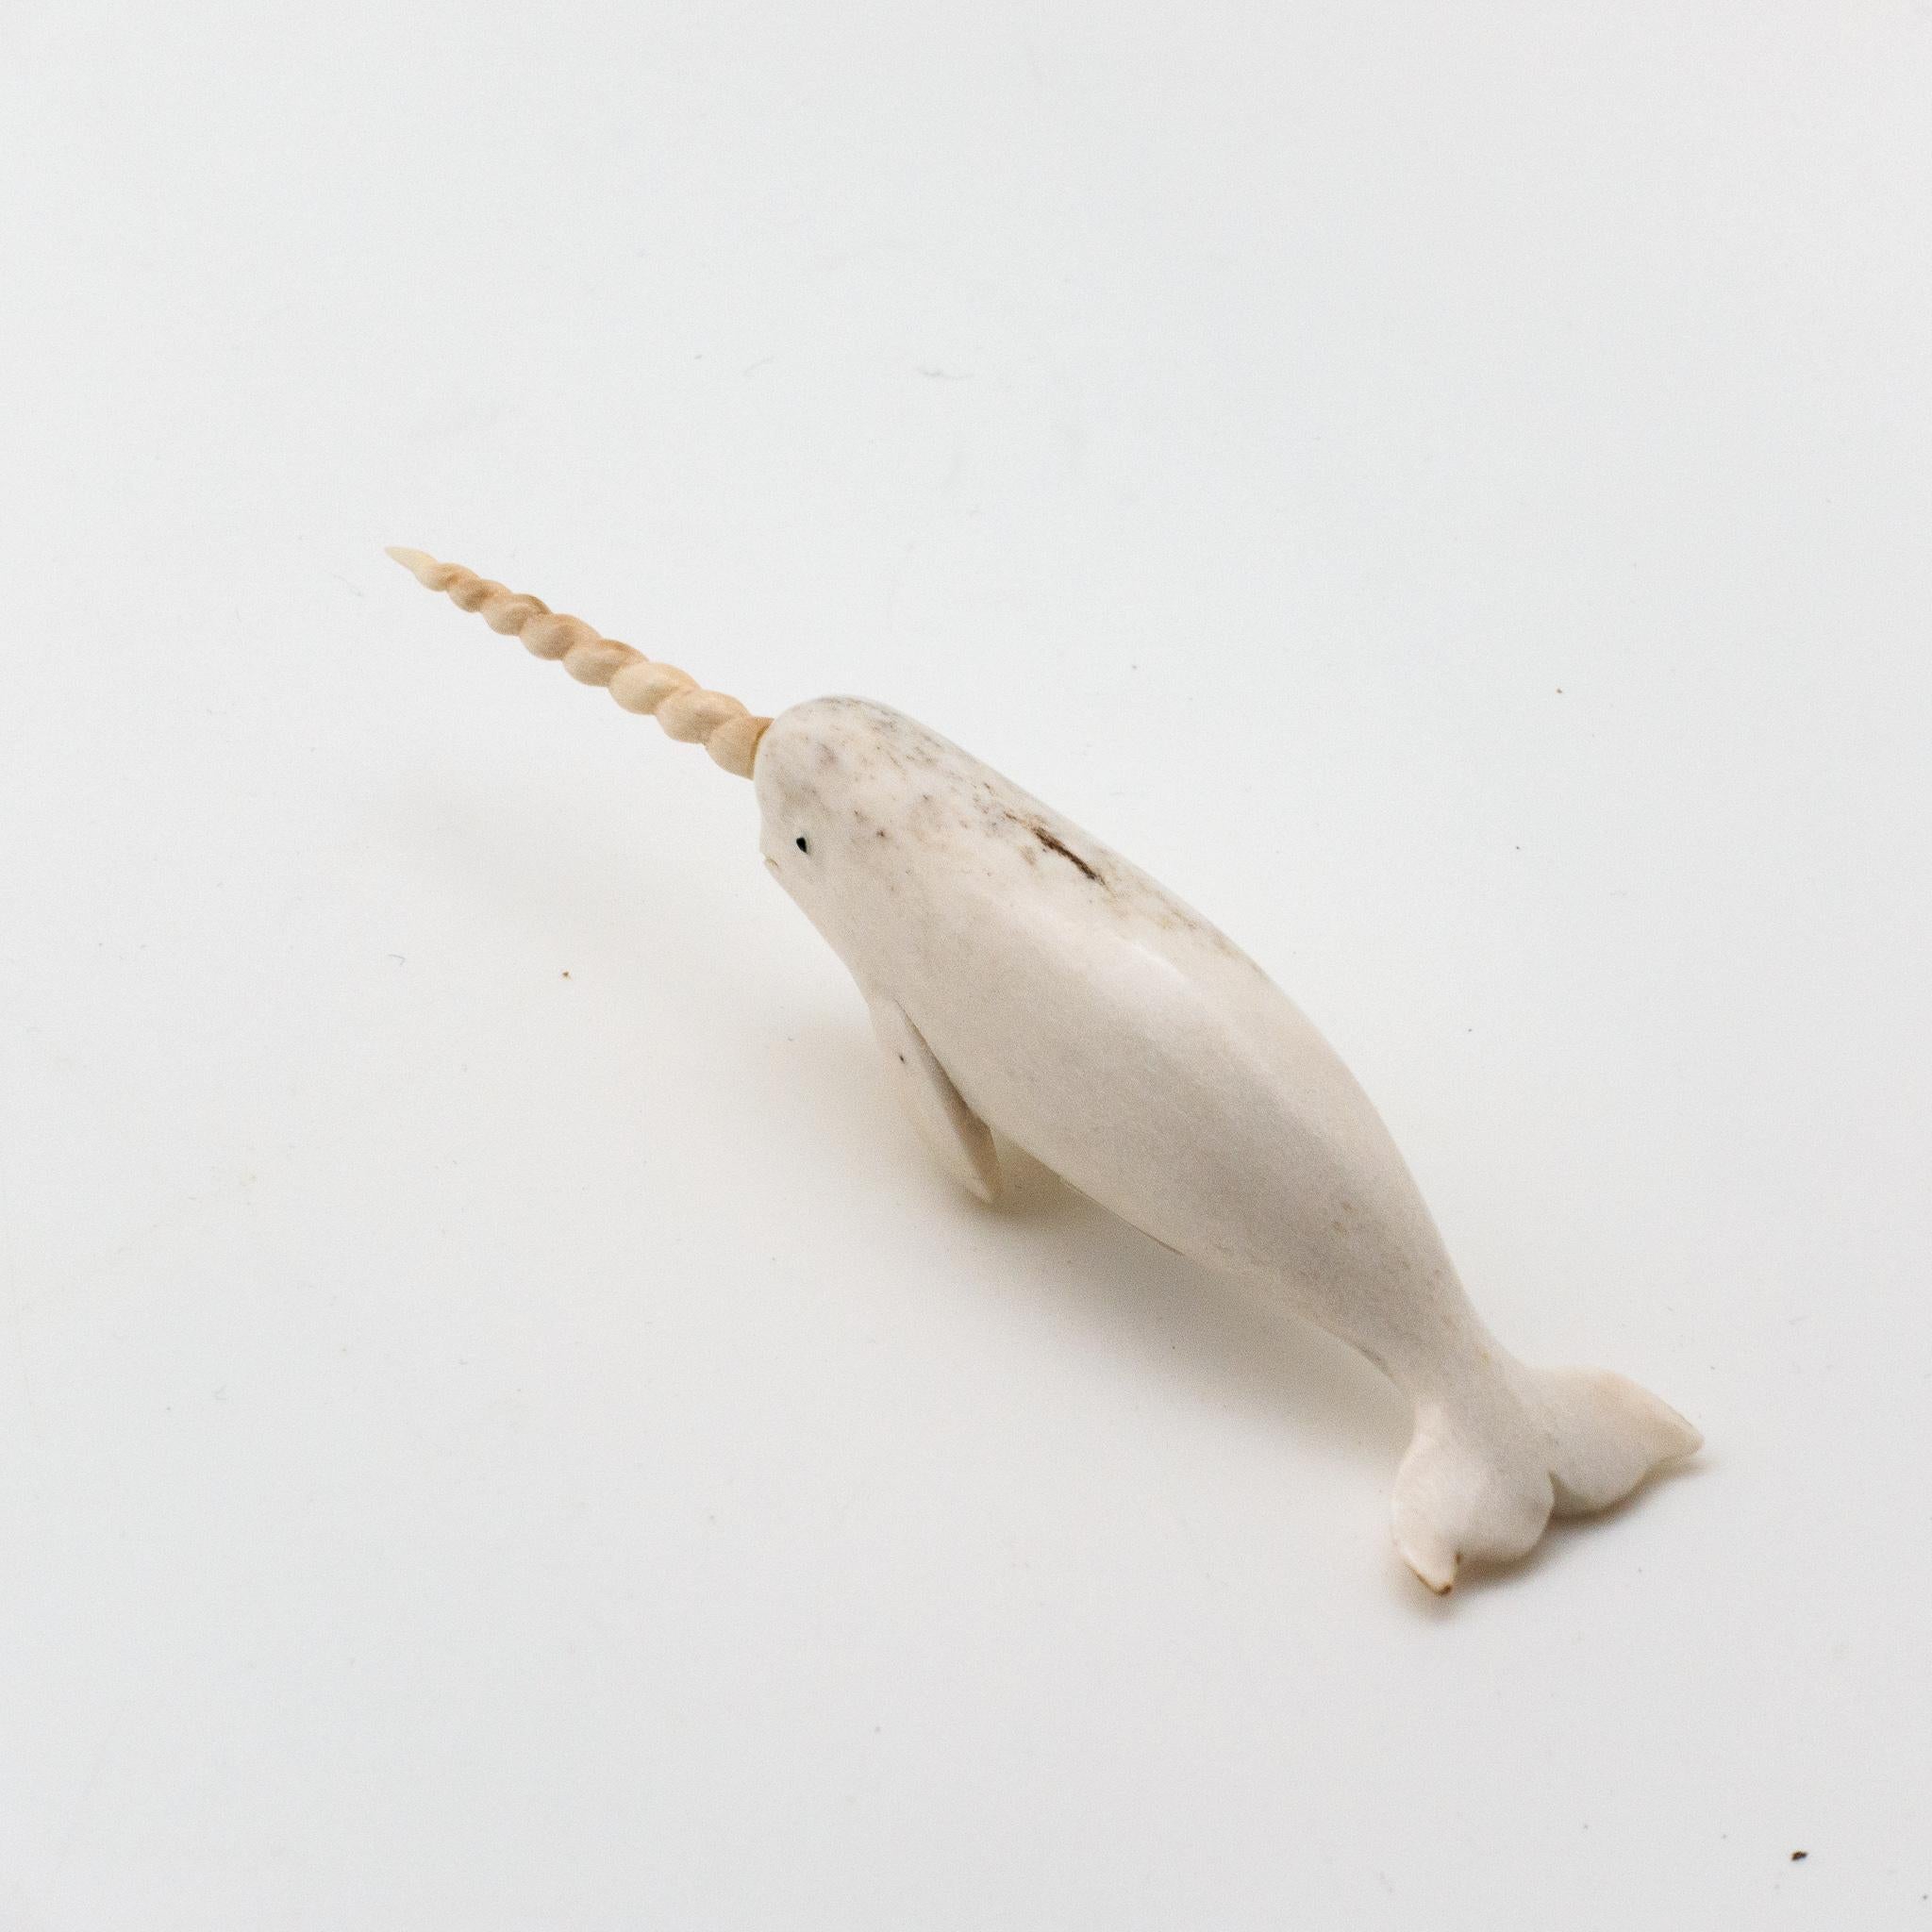 Contemporary North American Moose Antler Carving of Narwhal